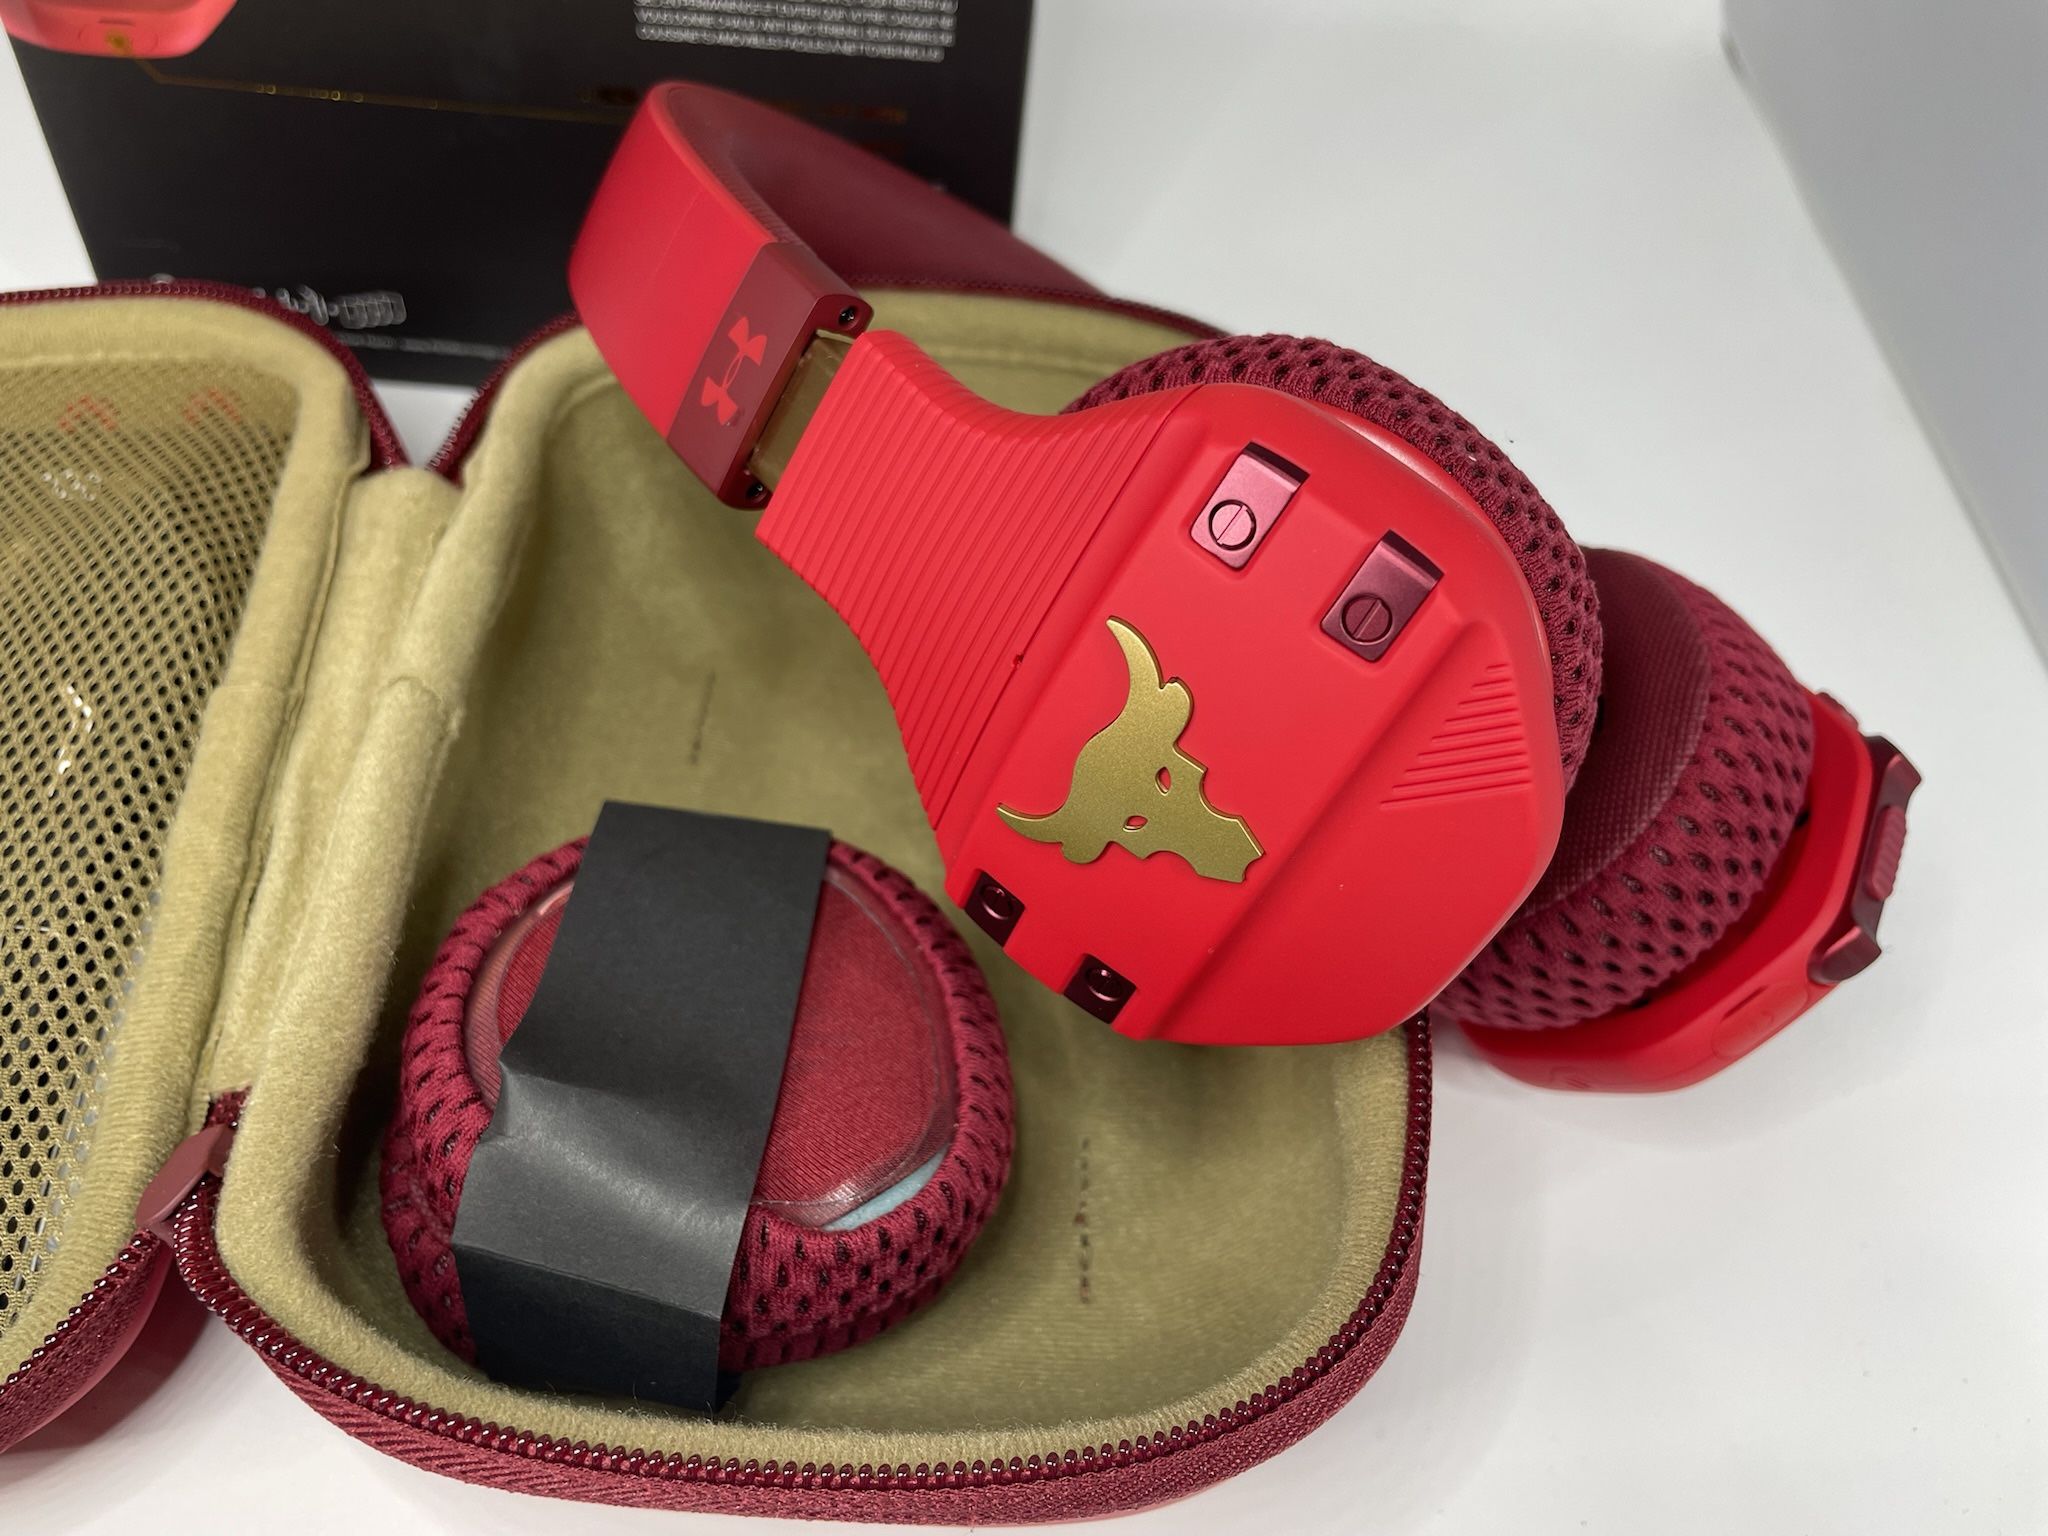 NEW In Box Under Armour Project Rock Wireless Headphones RED 